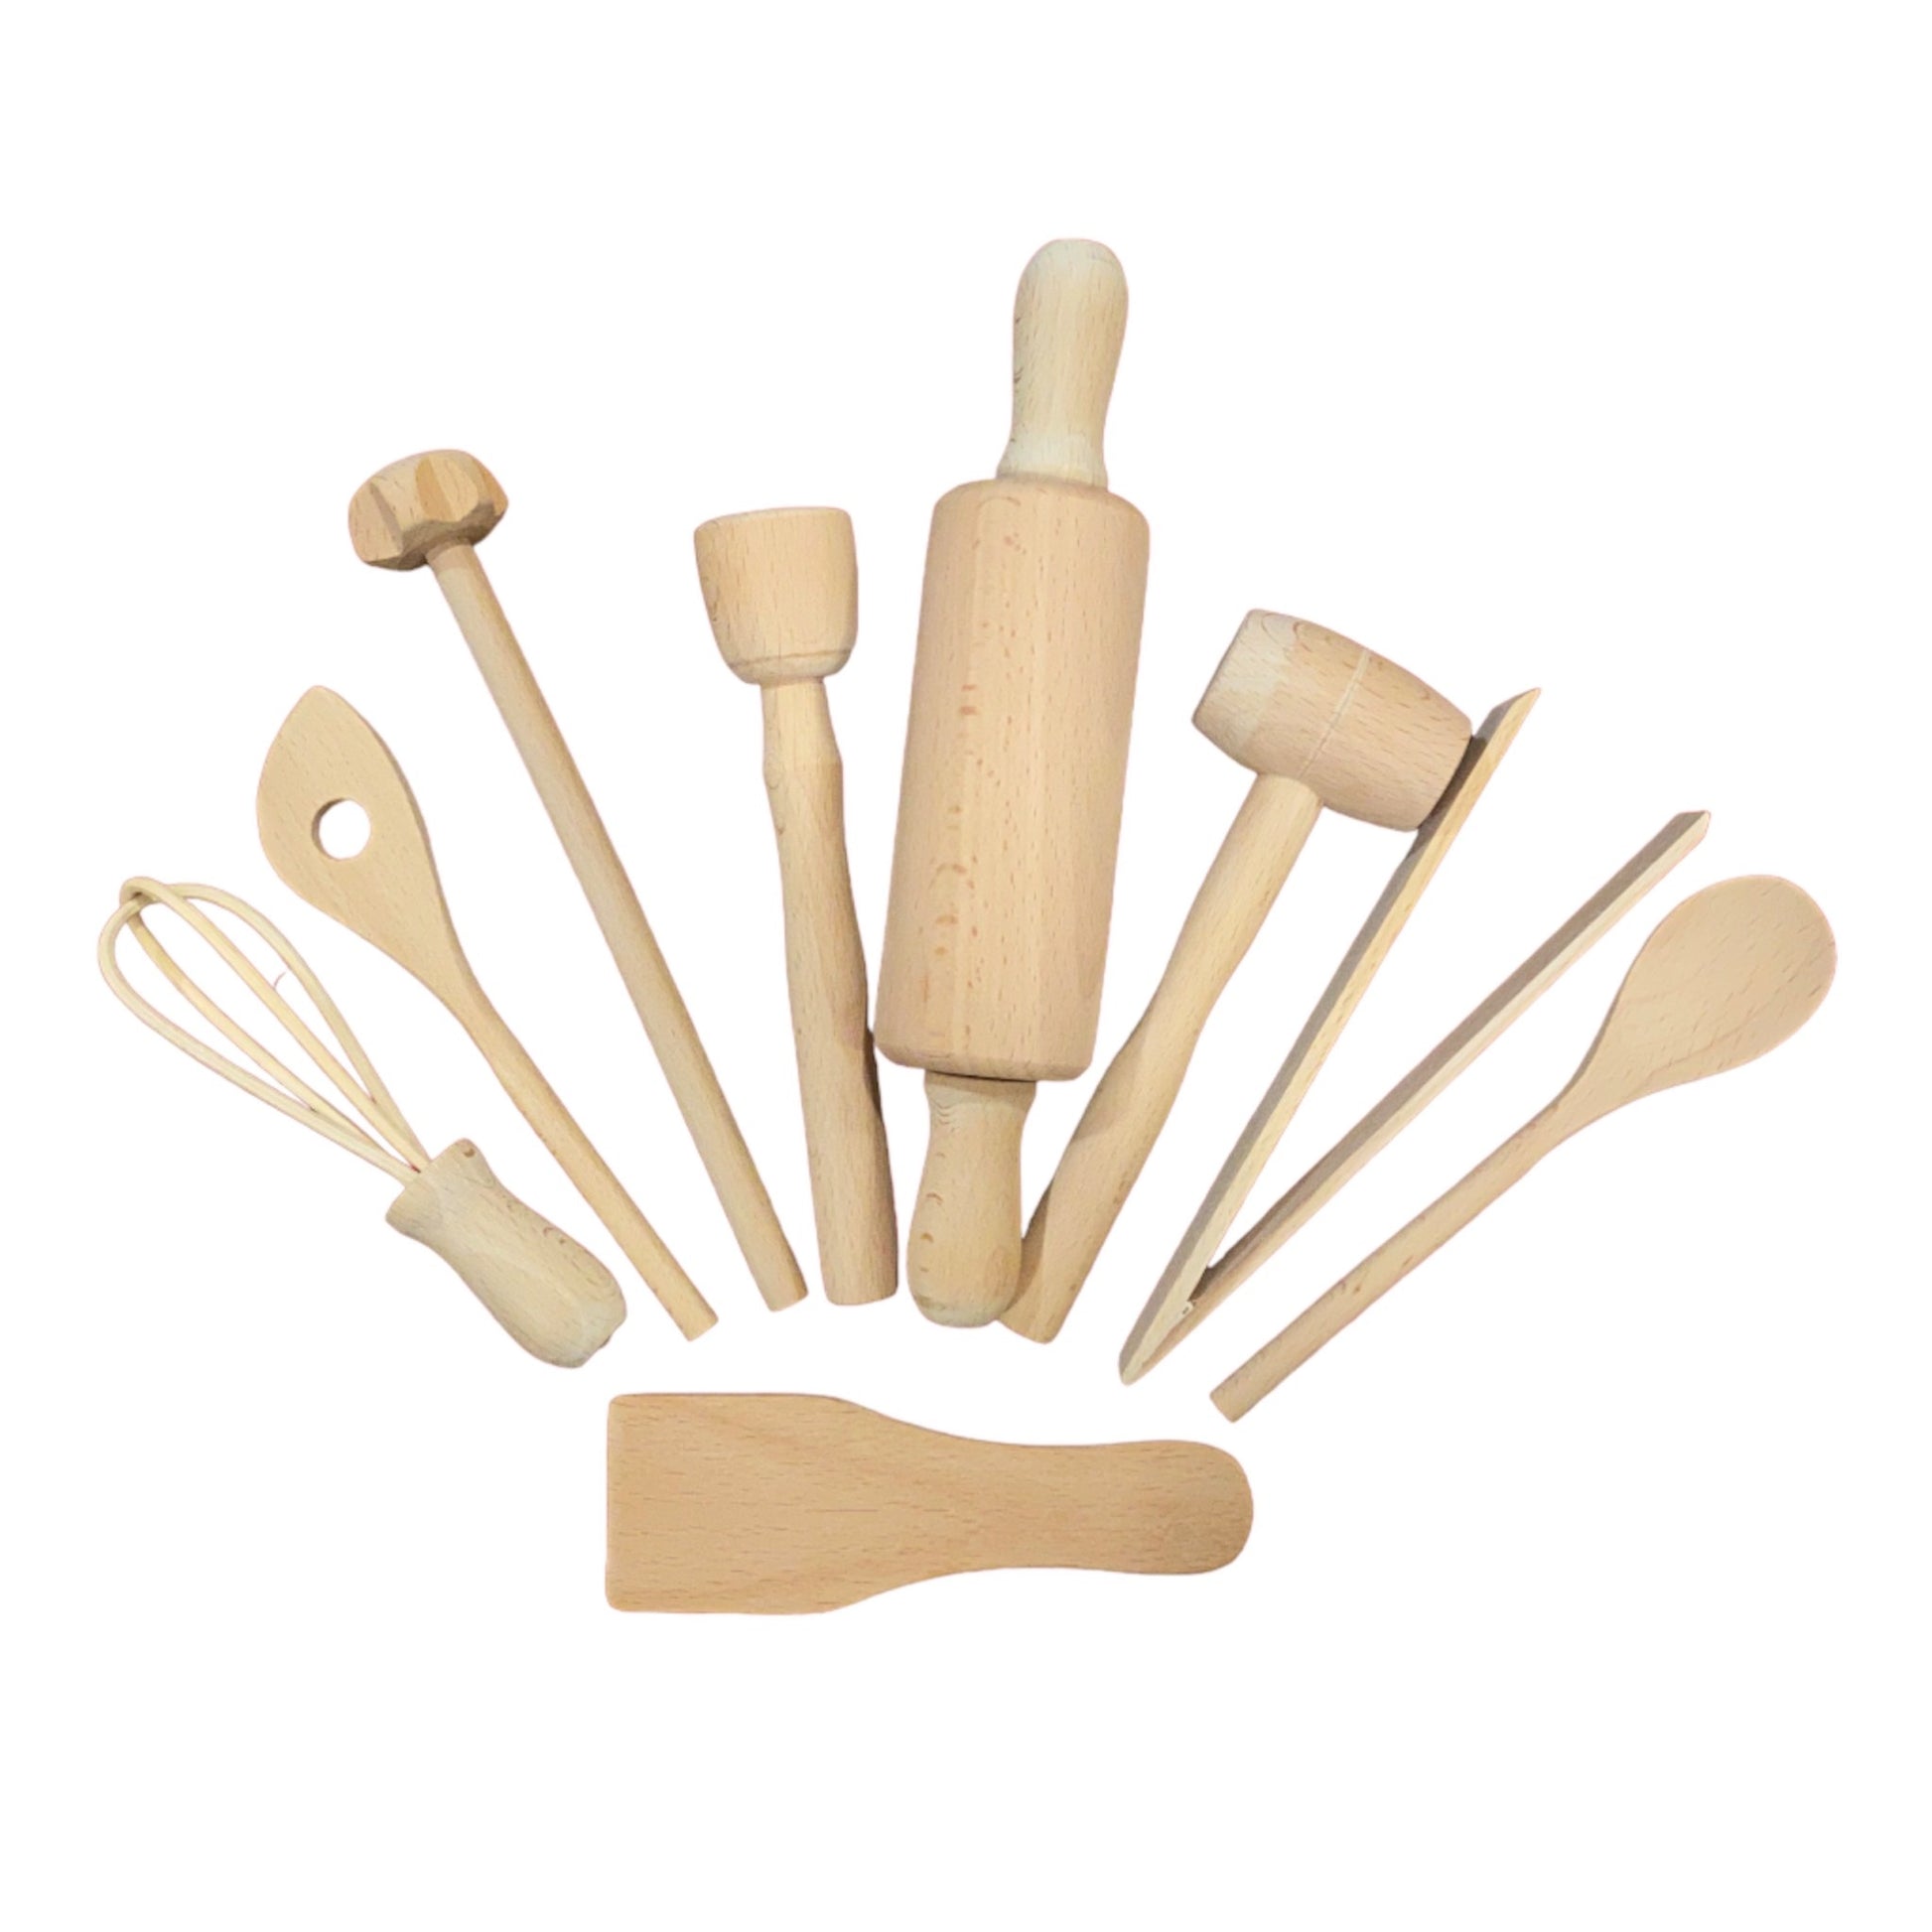 Beechwood Kids Cooking/Baking Tools Set - 9 Pieces, Eco-Friendly